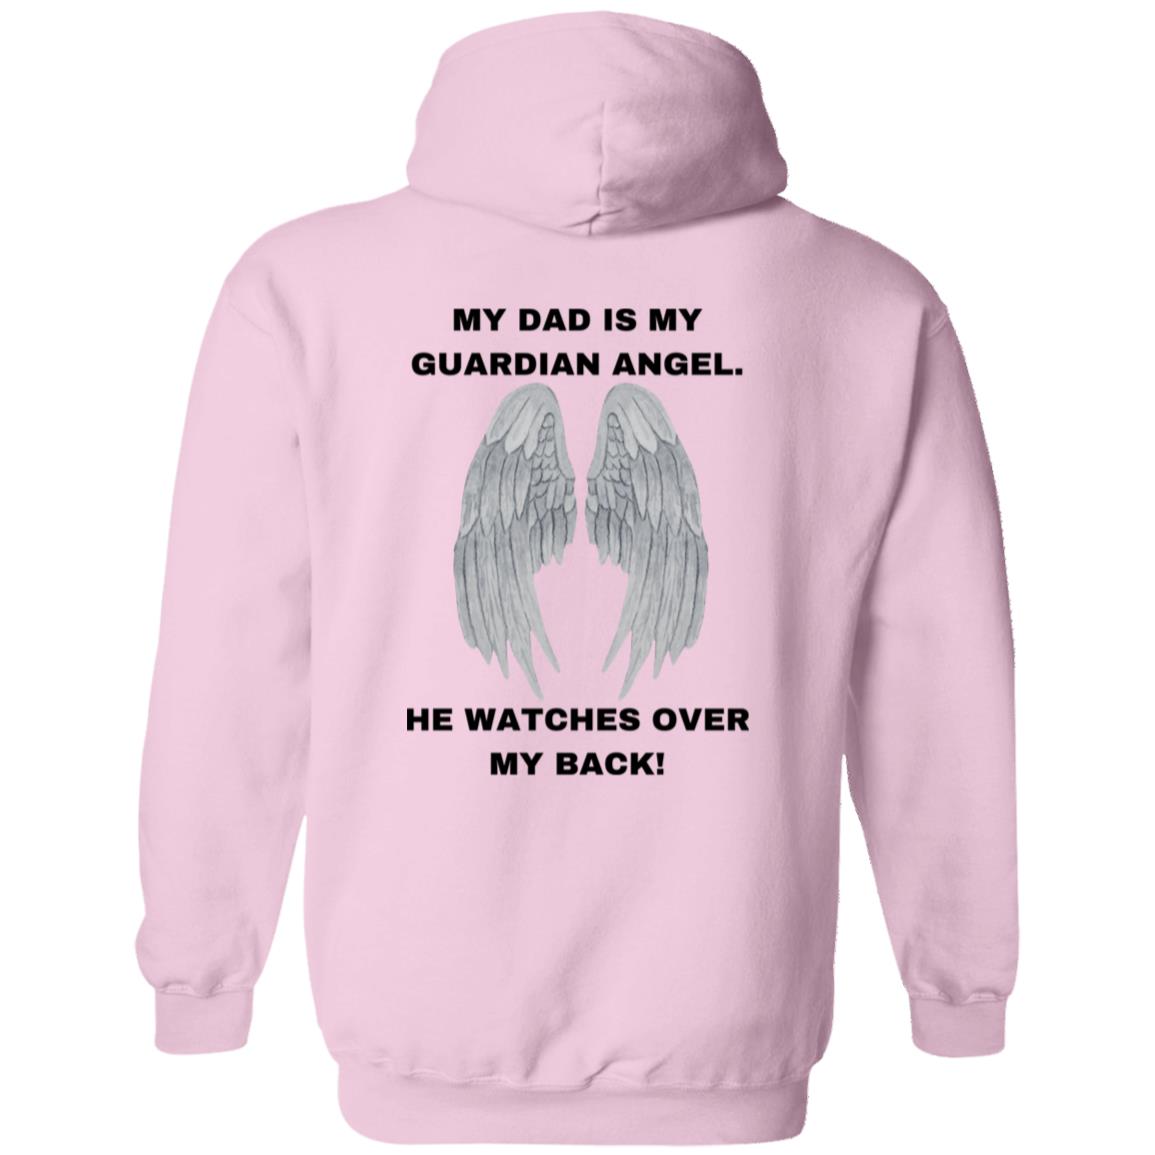 Get trendy with My Dad is my Guardian Angel black text Pullover Hoodie 8 oz (Closeout) -  available at Good Gift Company. Grab yours for $38 today!